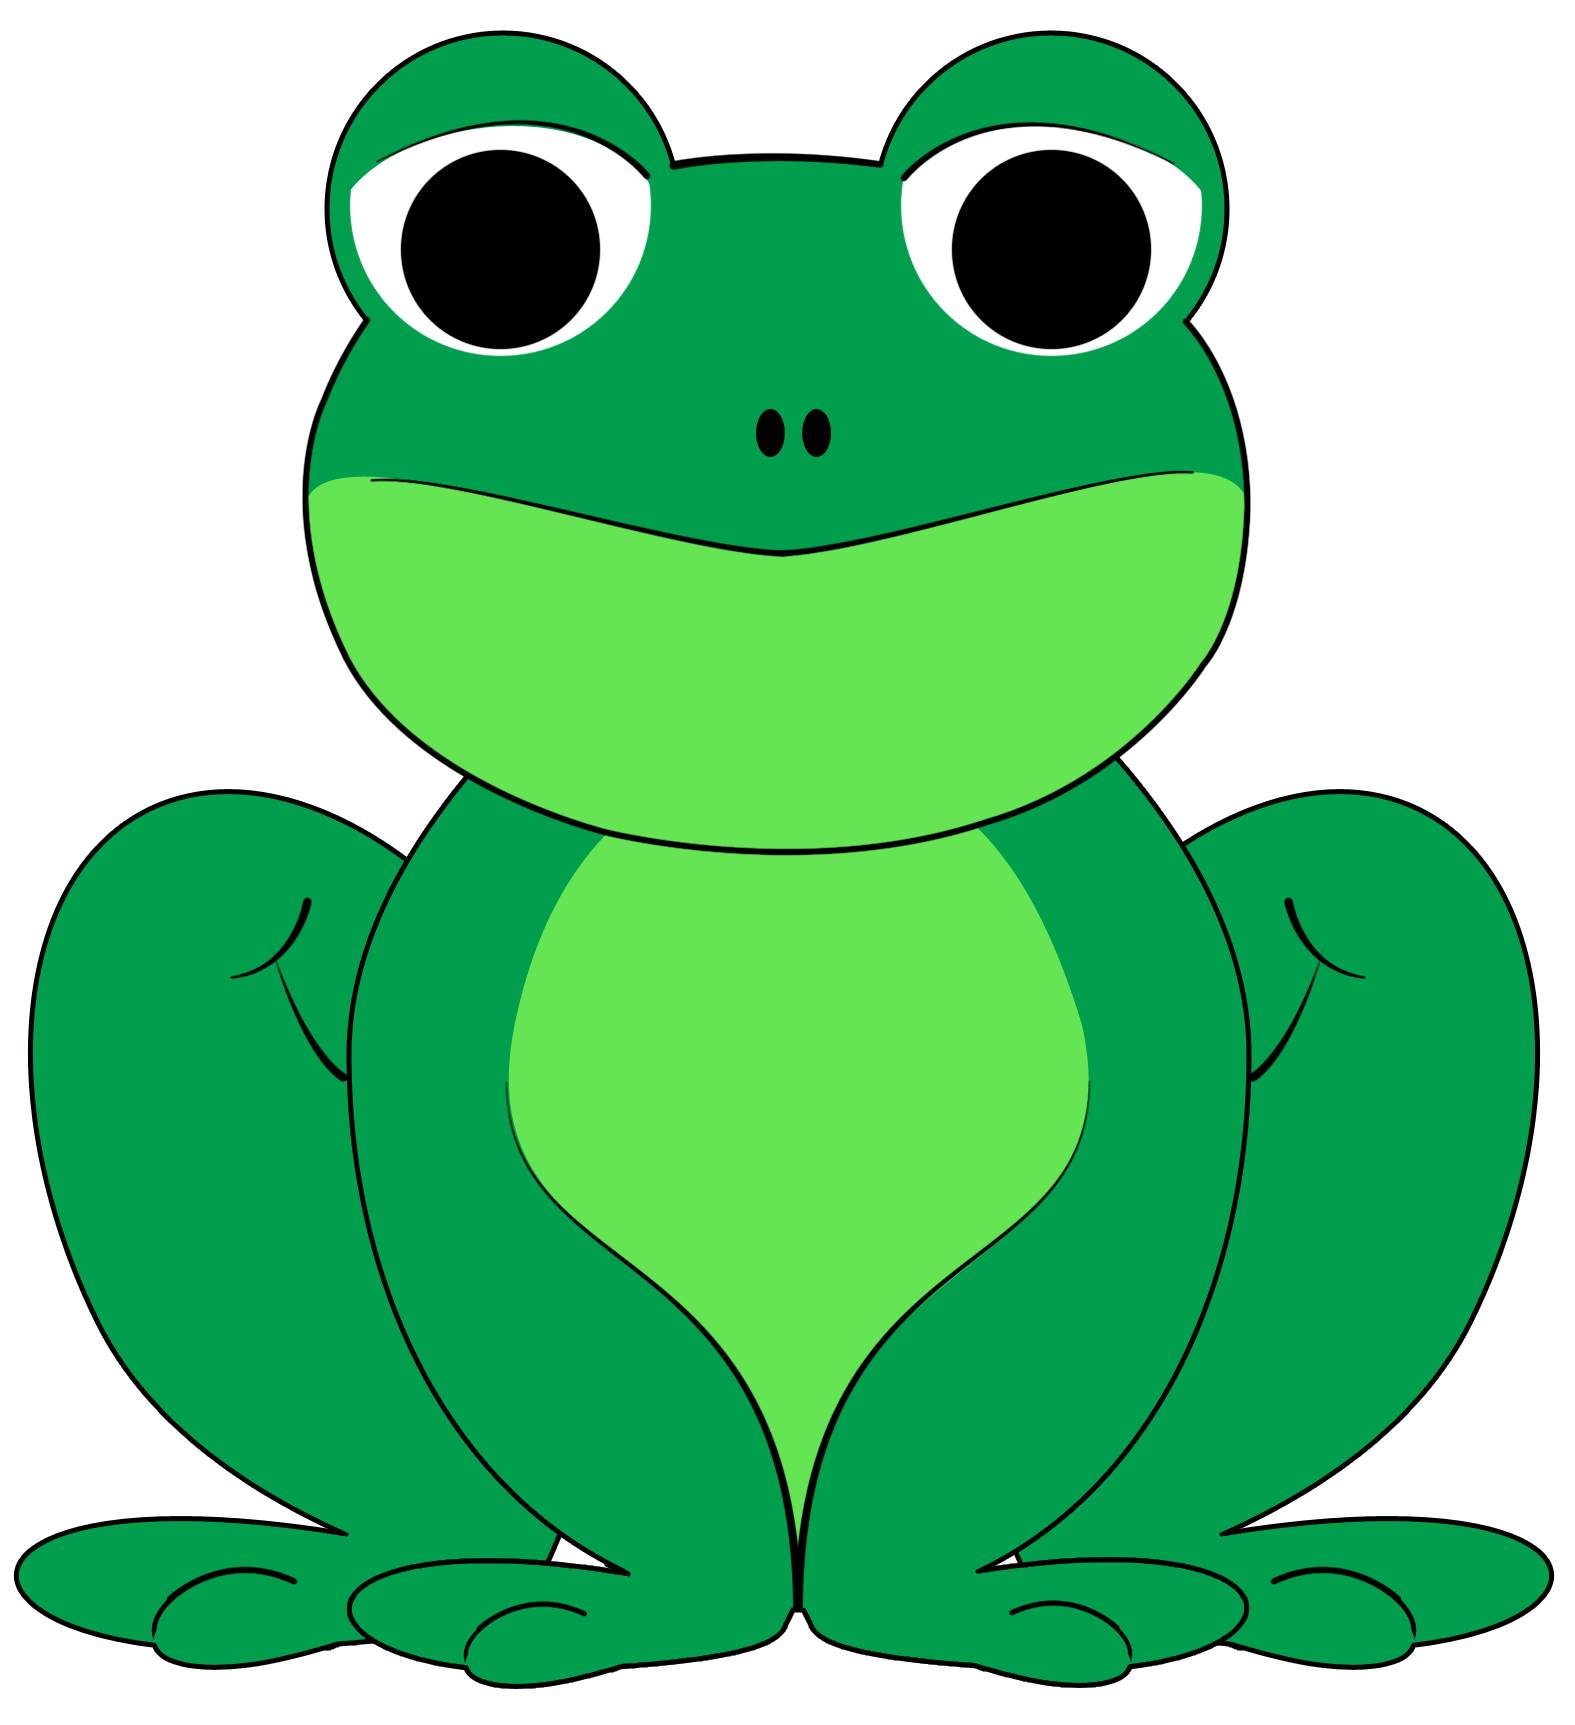 Green frog clipart free clipart images - Cliparting.com